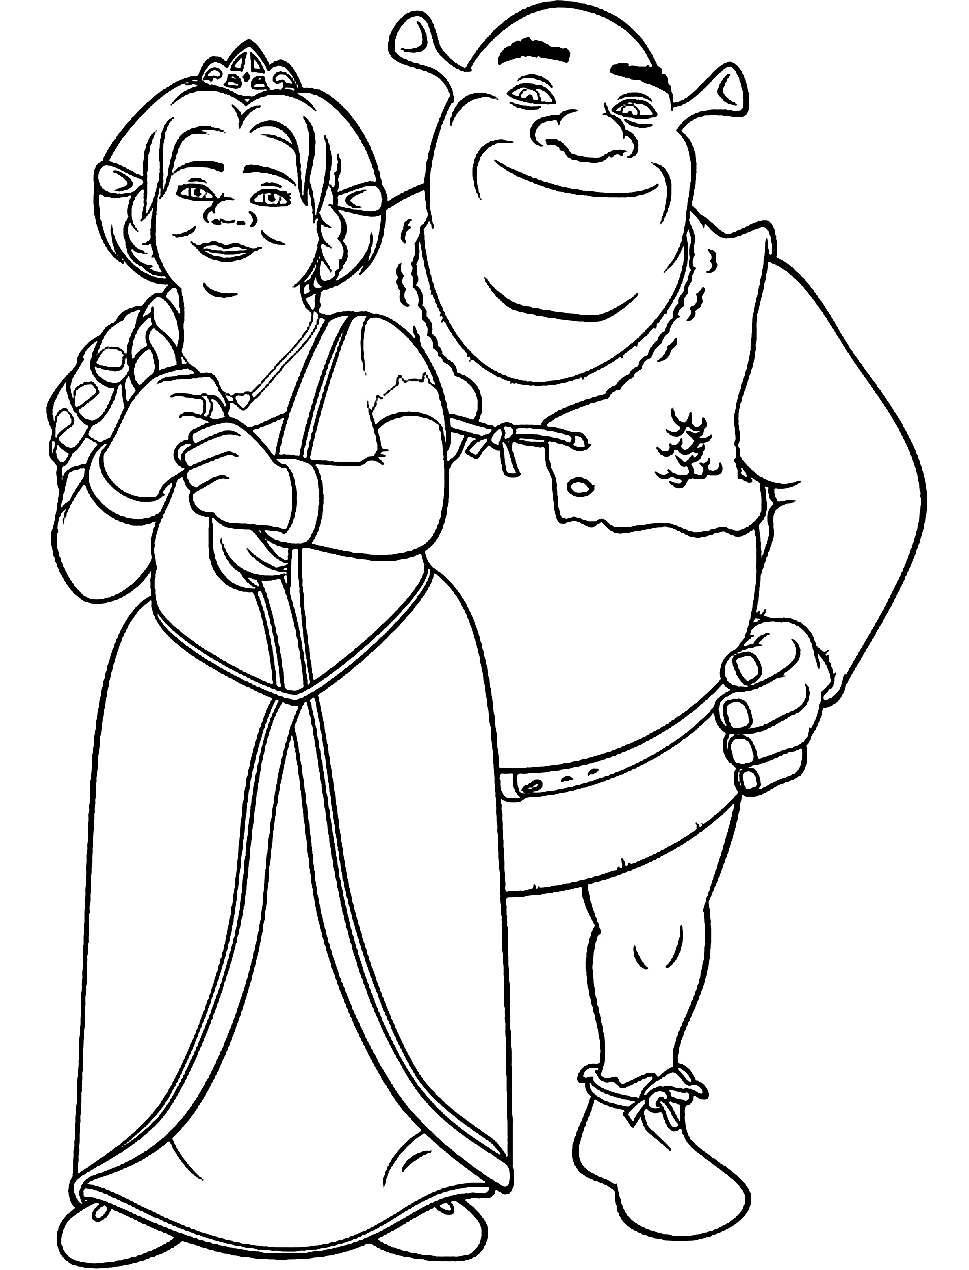 Fiona And Shrek Are Happy Coloring Page